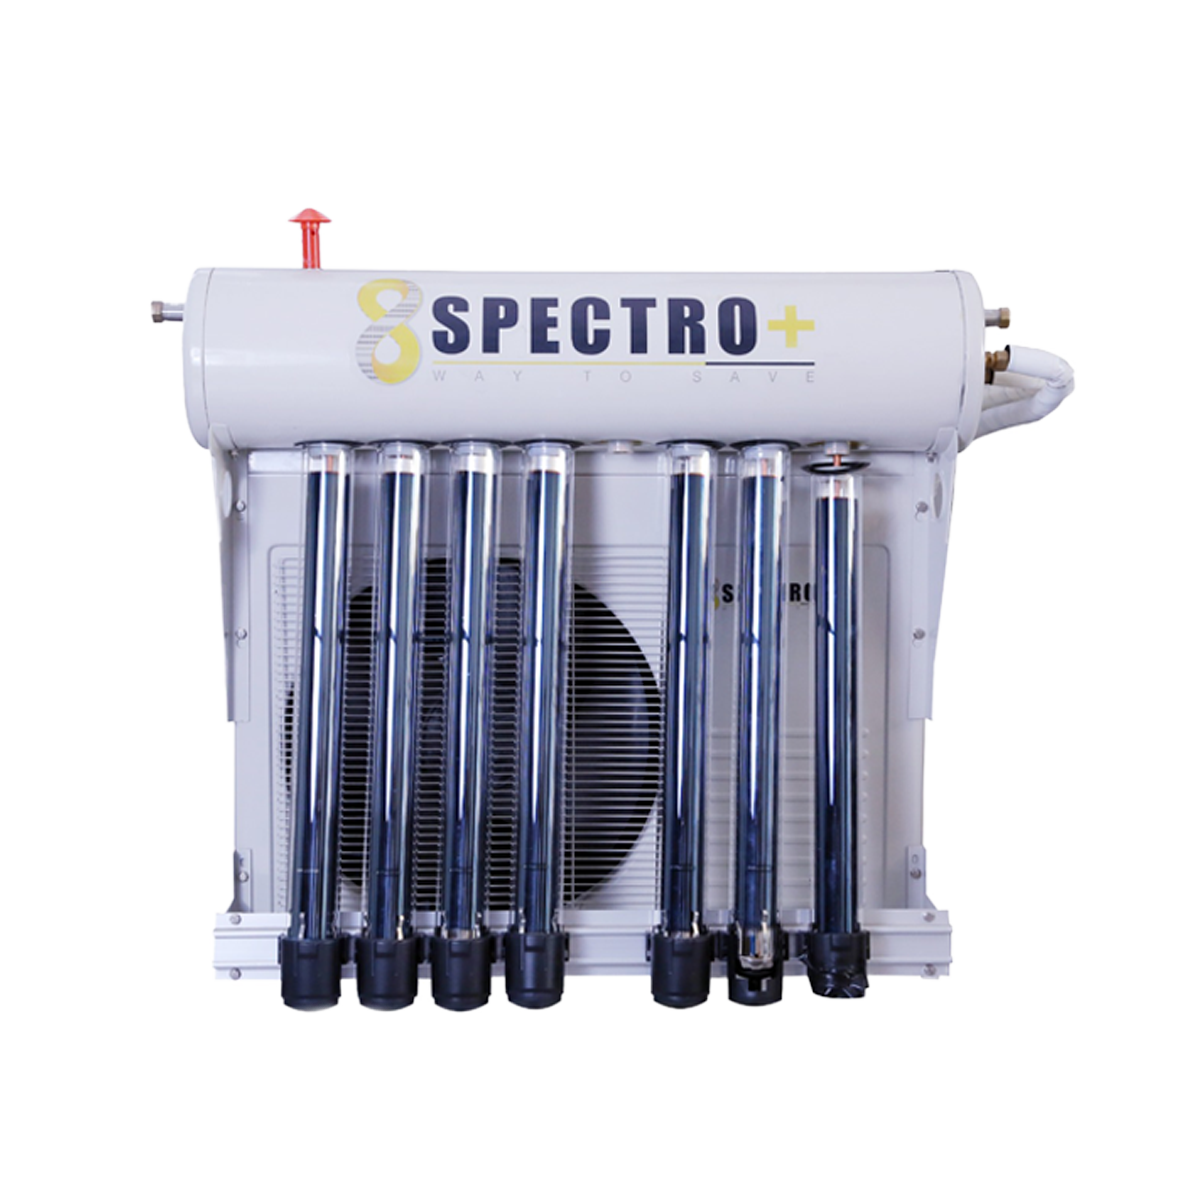 Spectro+ Solar Thermal Hybrid Air Conditioner